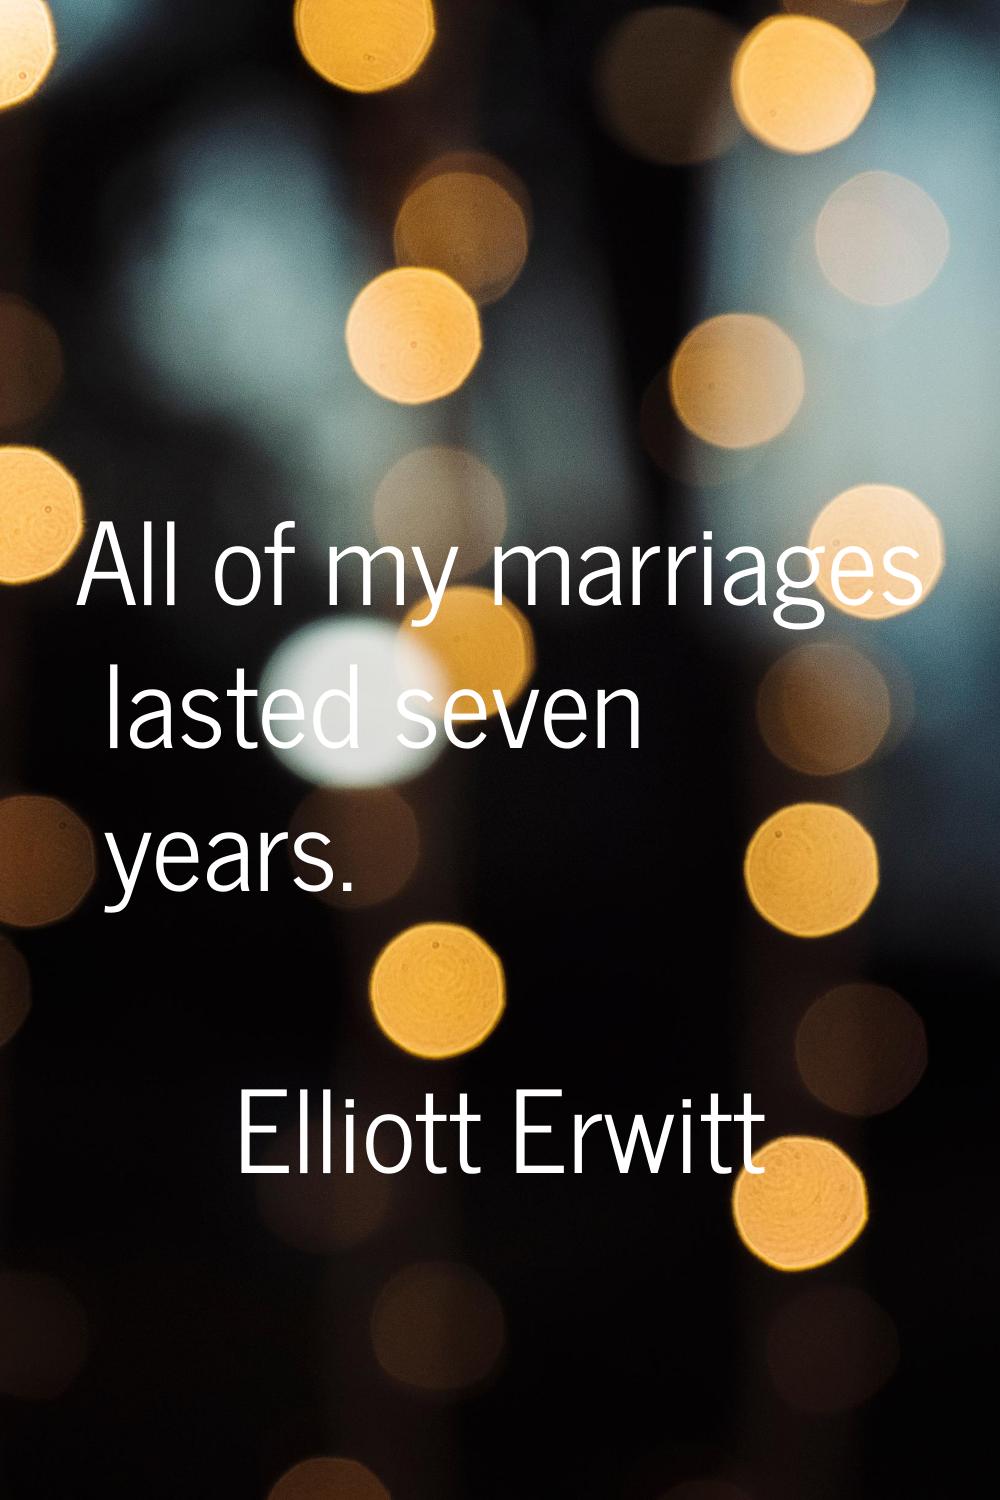 All of my marriages lasted seven years.